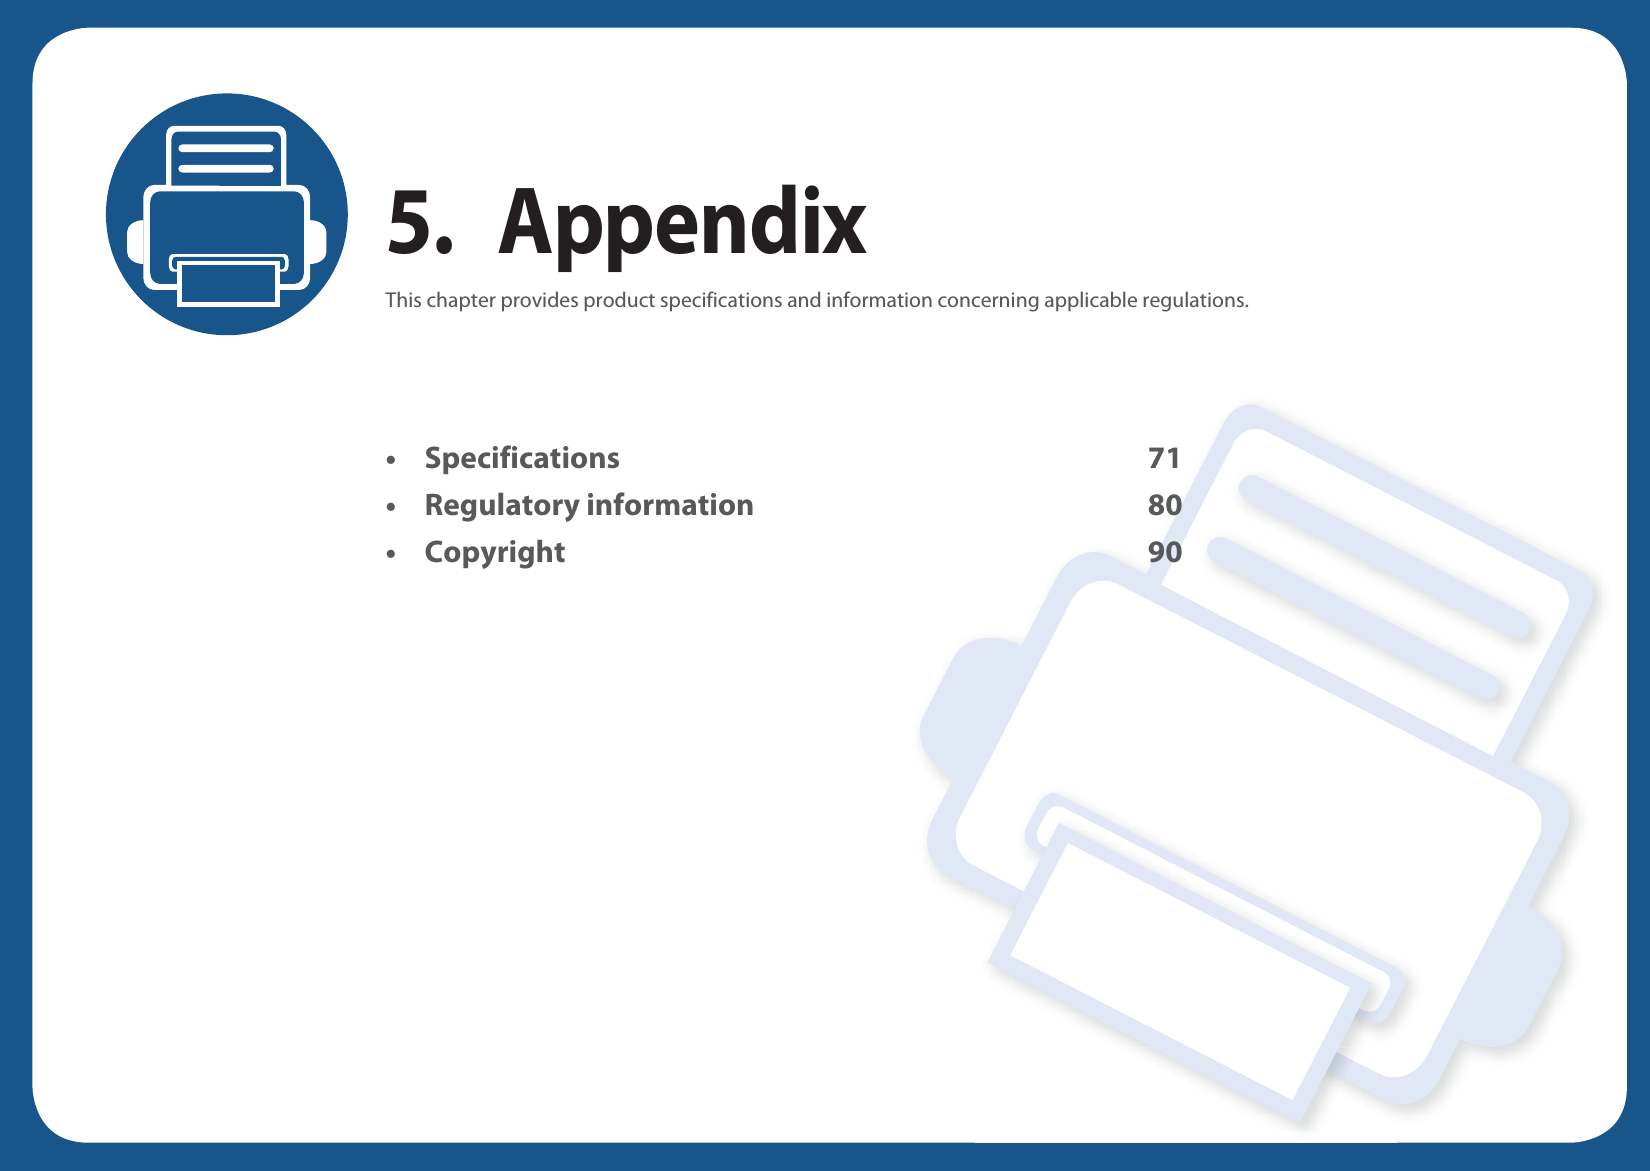 5. AppendixThis chapter provides product specifications and information concerning applicable regulations.• Specifications 71• Regulatory information 80• Copyright 90